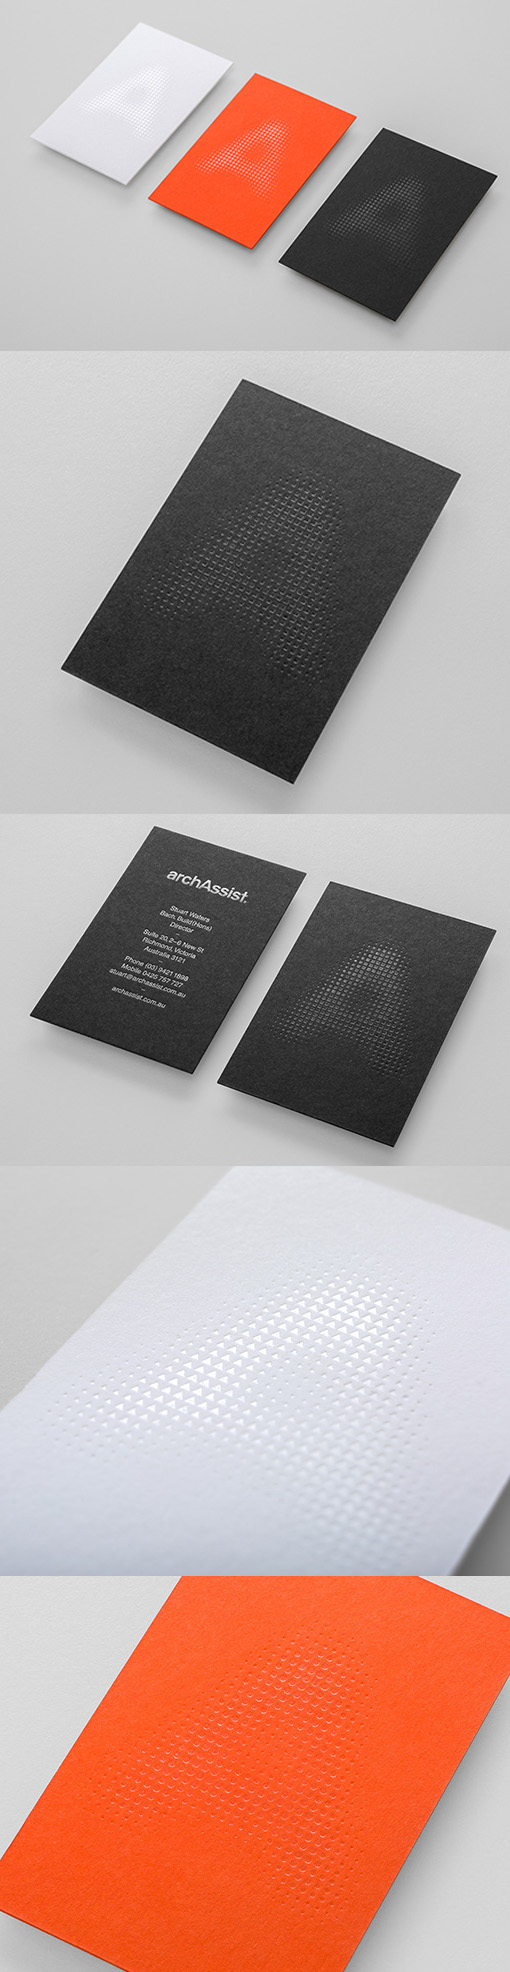 Subtle And Clever Use Of Texture On Block Colour Business Cards For An Architecture Firm